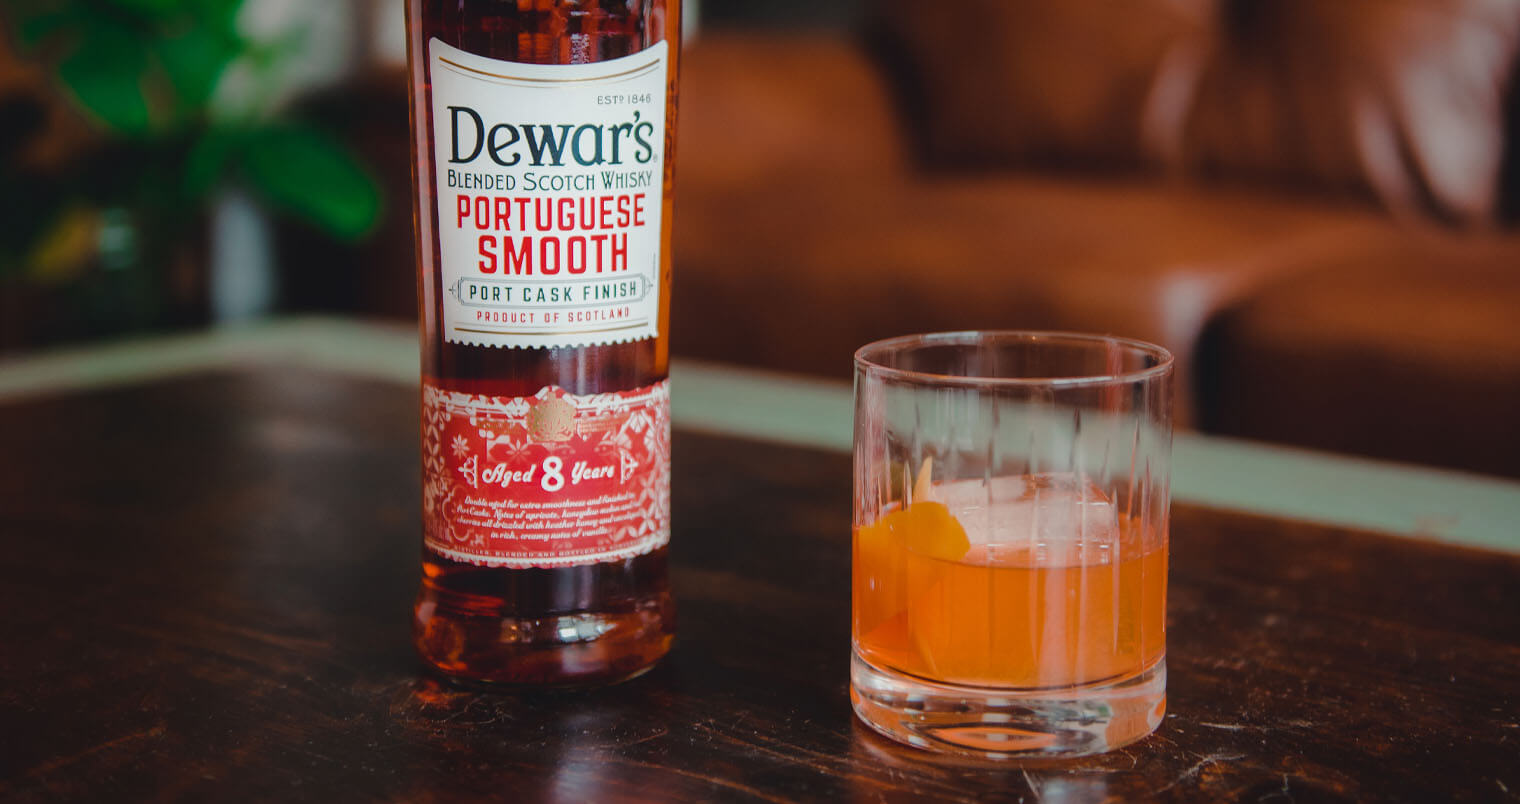 Dewars Portuguese Smooth featured image